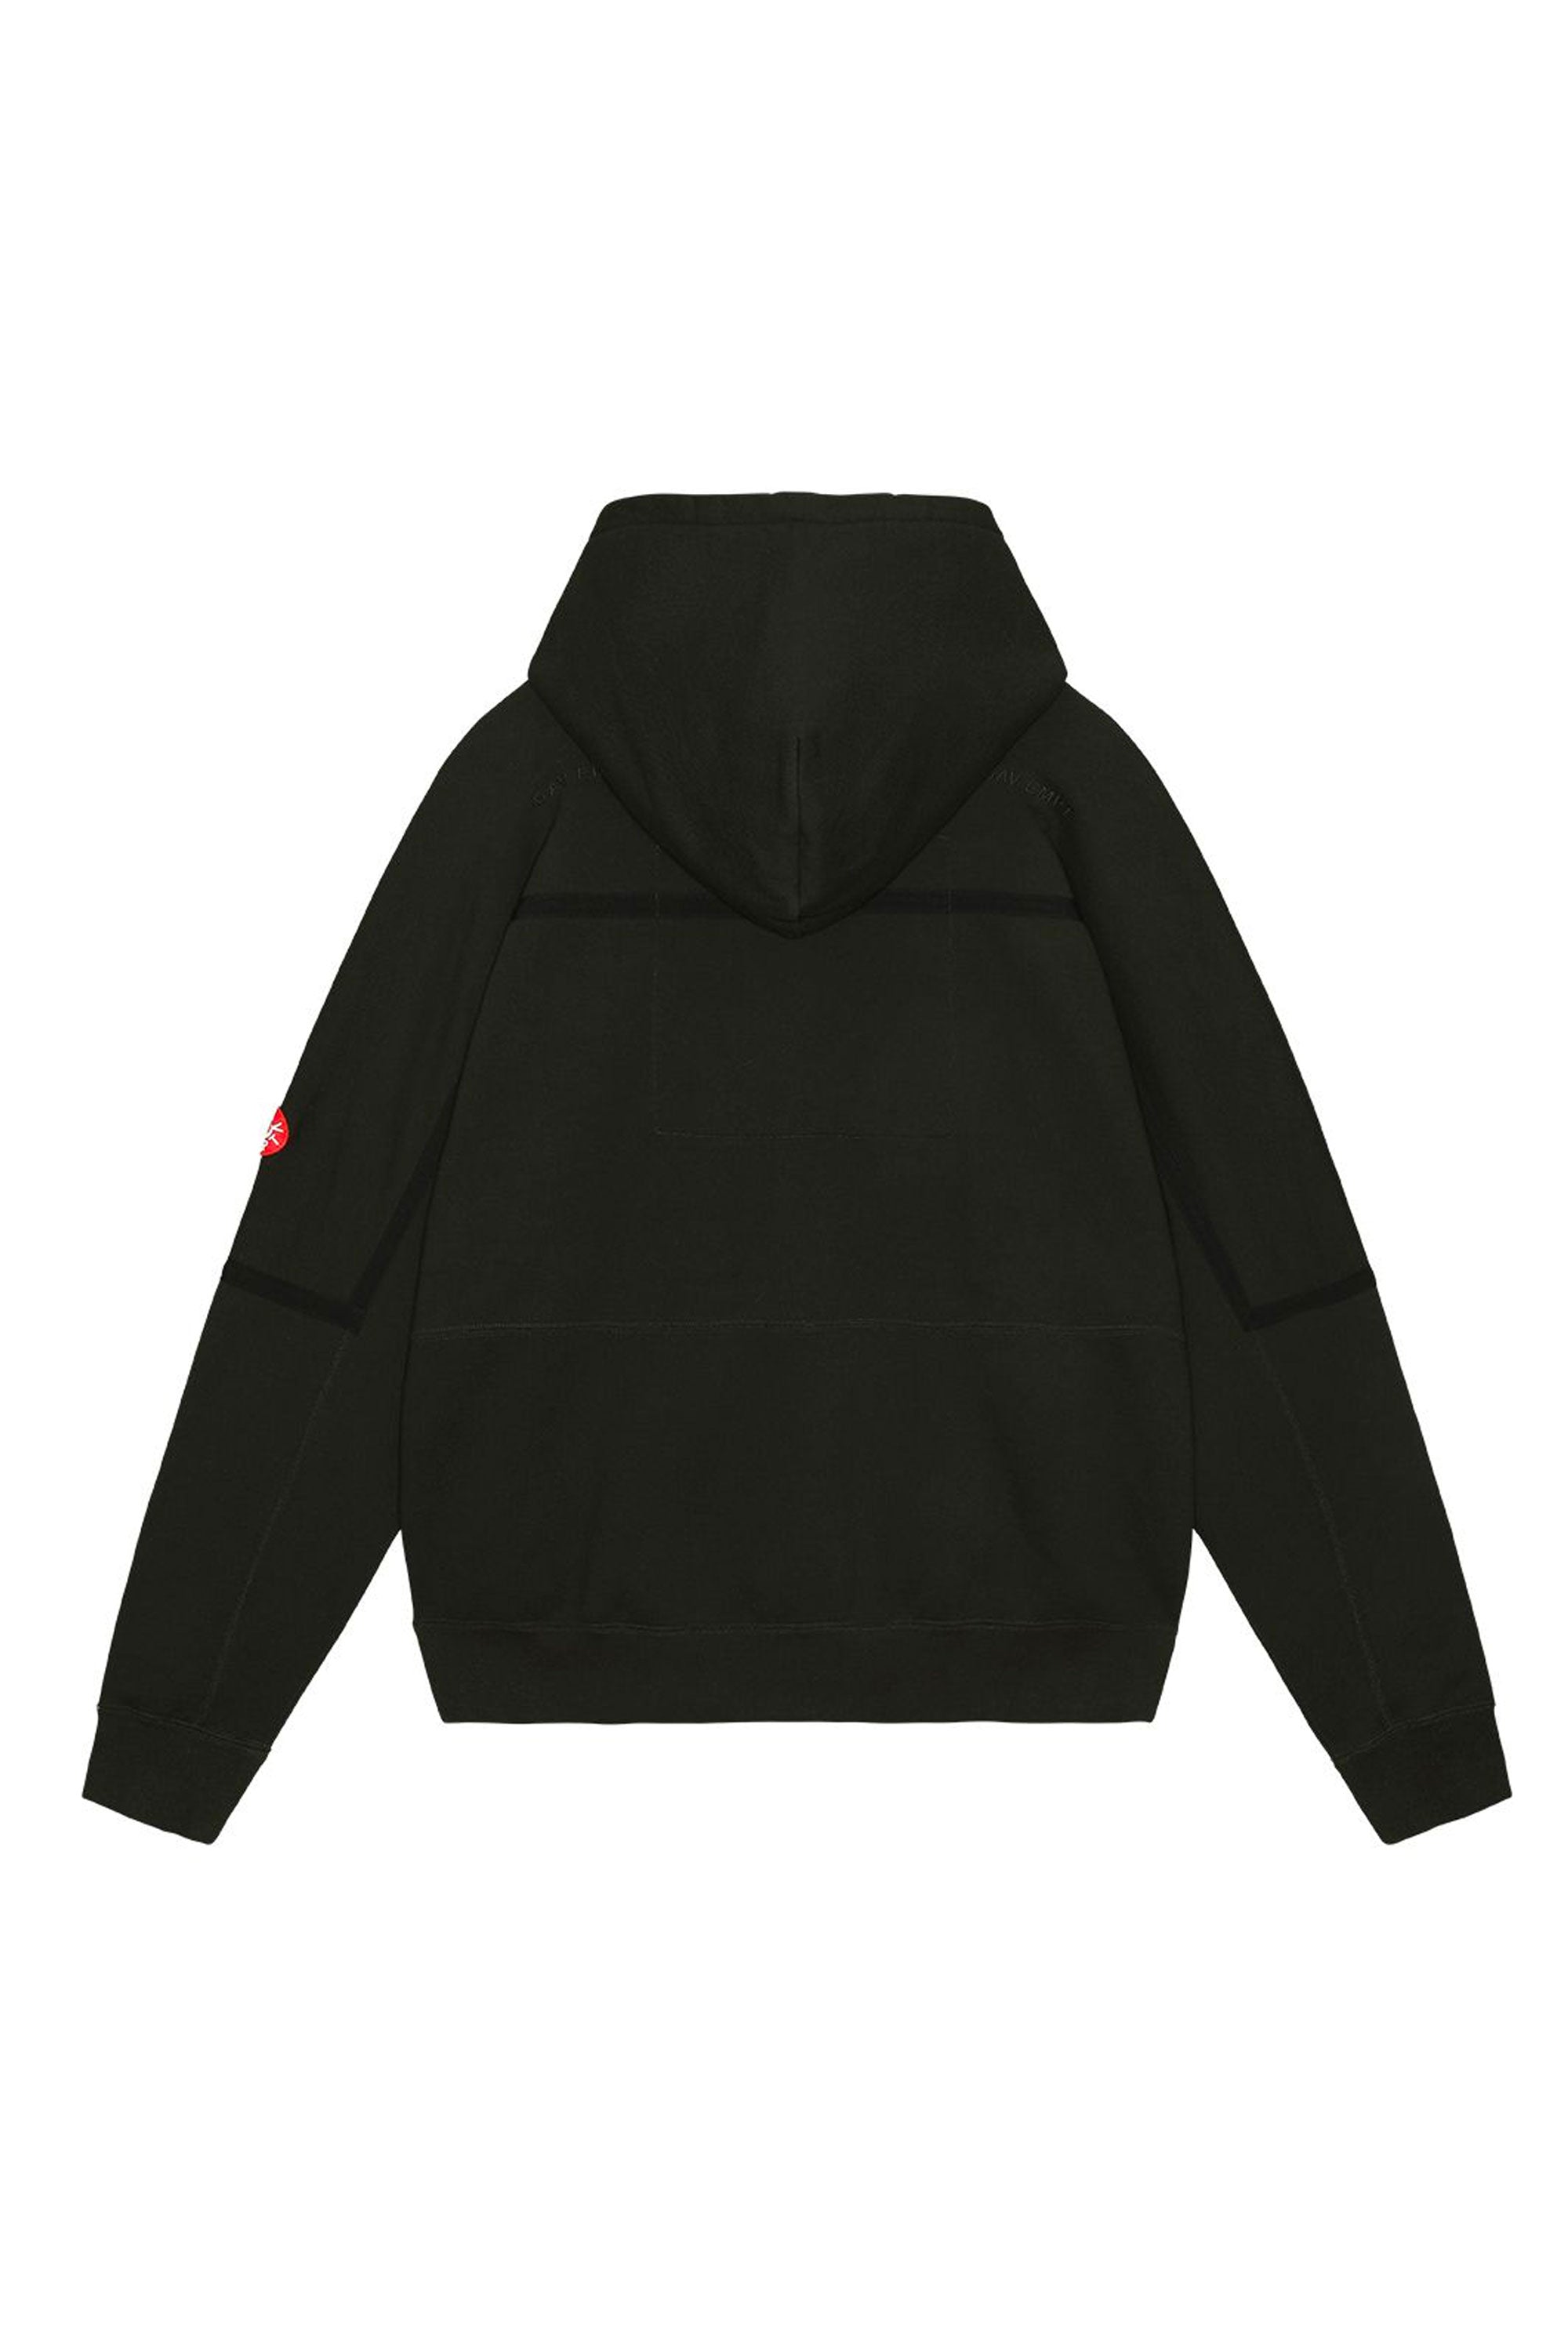 The CAV EMPT - TAPED CUT ZIP HEAVY HOODY  available online with global shipping, and in PAM Stores Melbourne and Sydney.